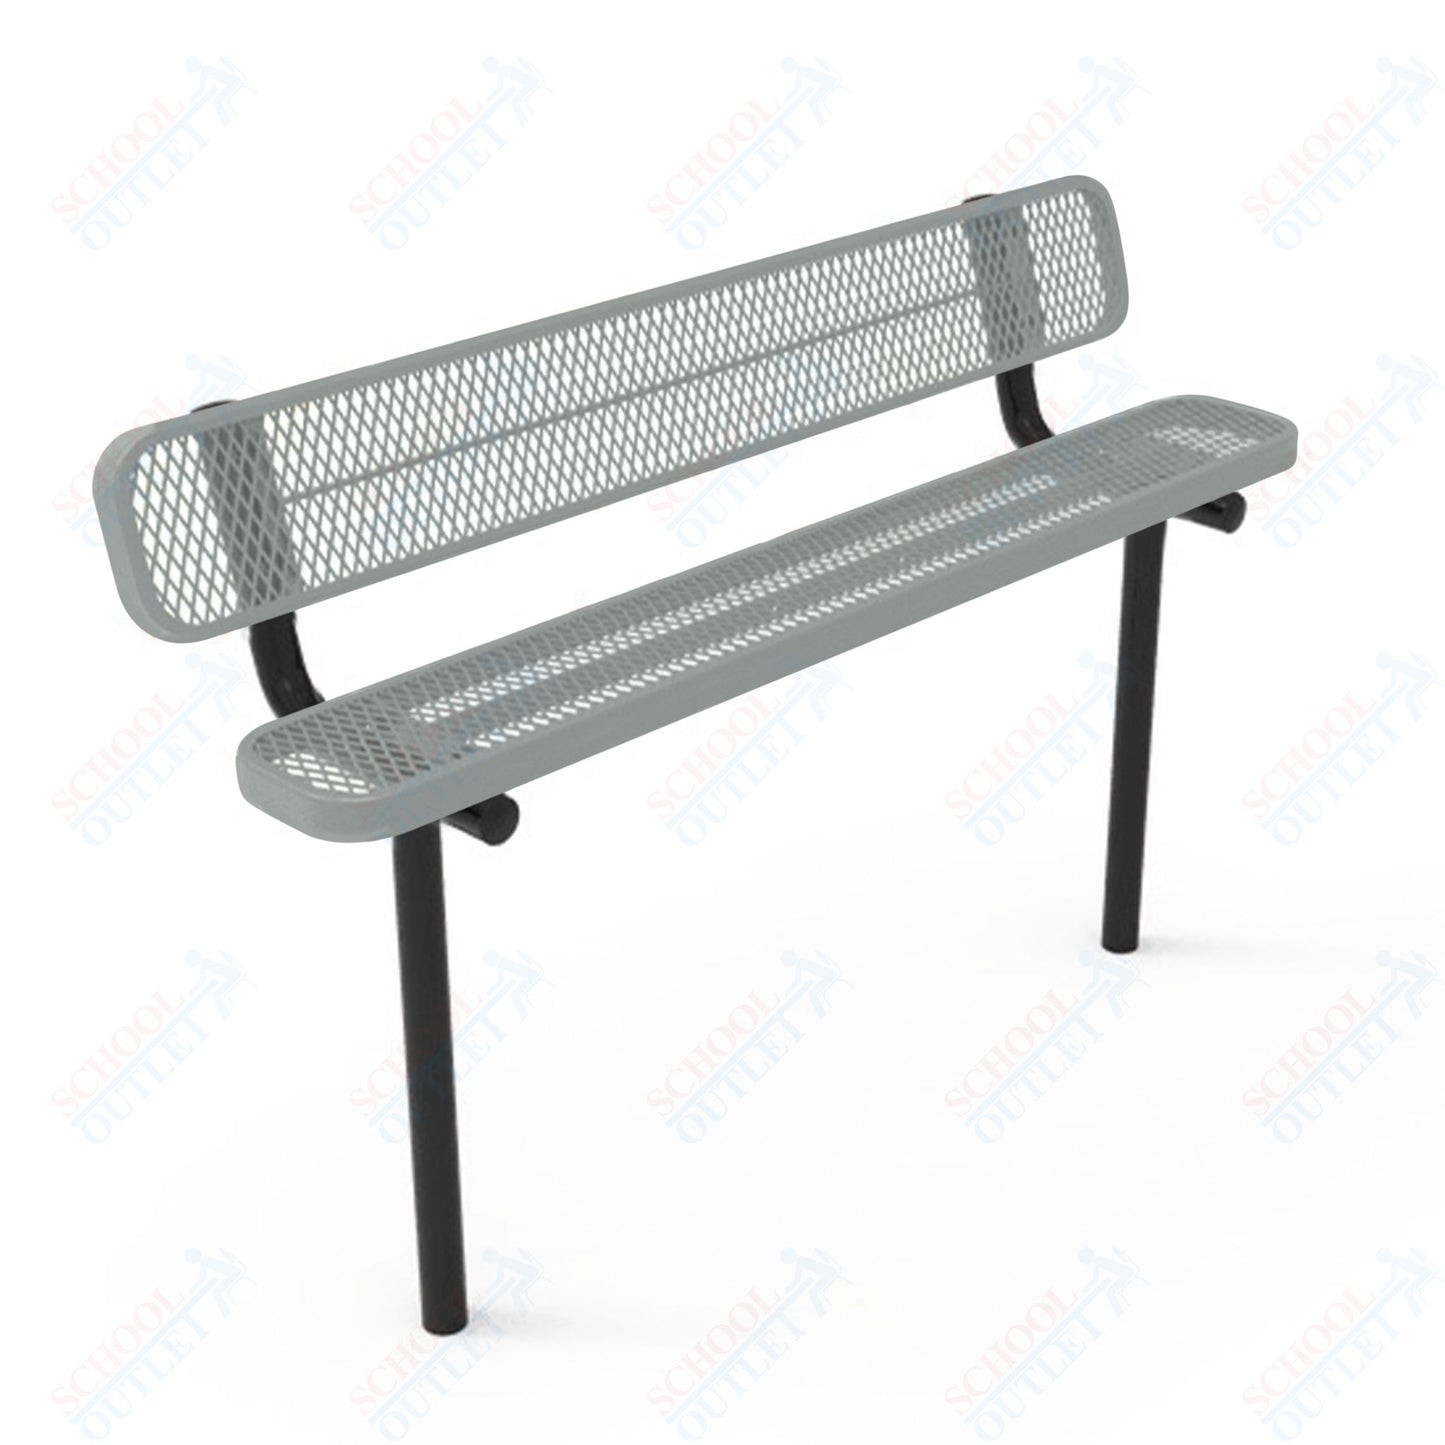 MyTcoat - Standard Outdoor Bench with Back - Inground Mount 6' L (MYT-BRT06-19)